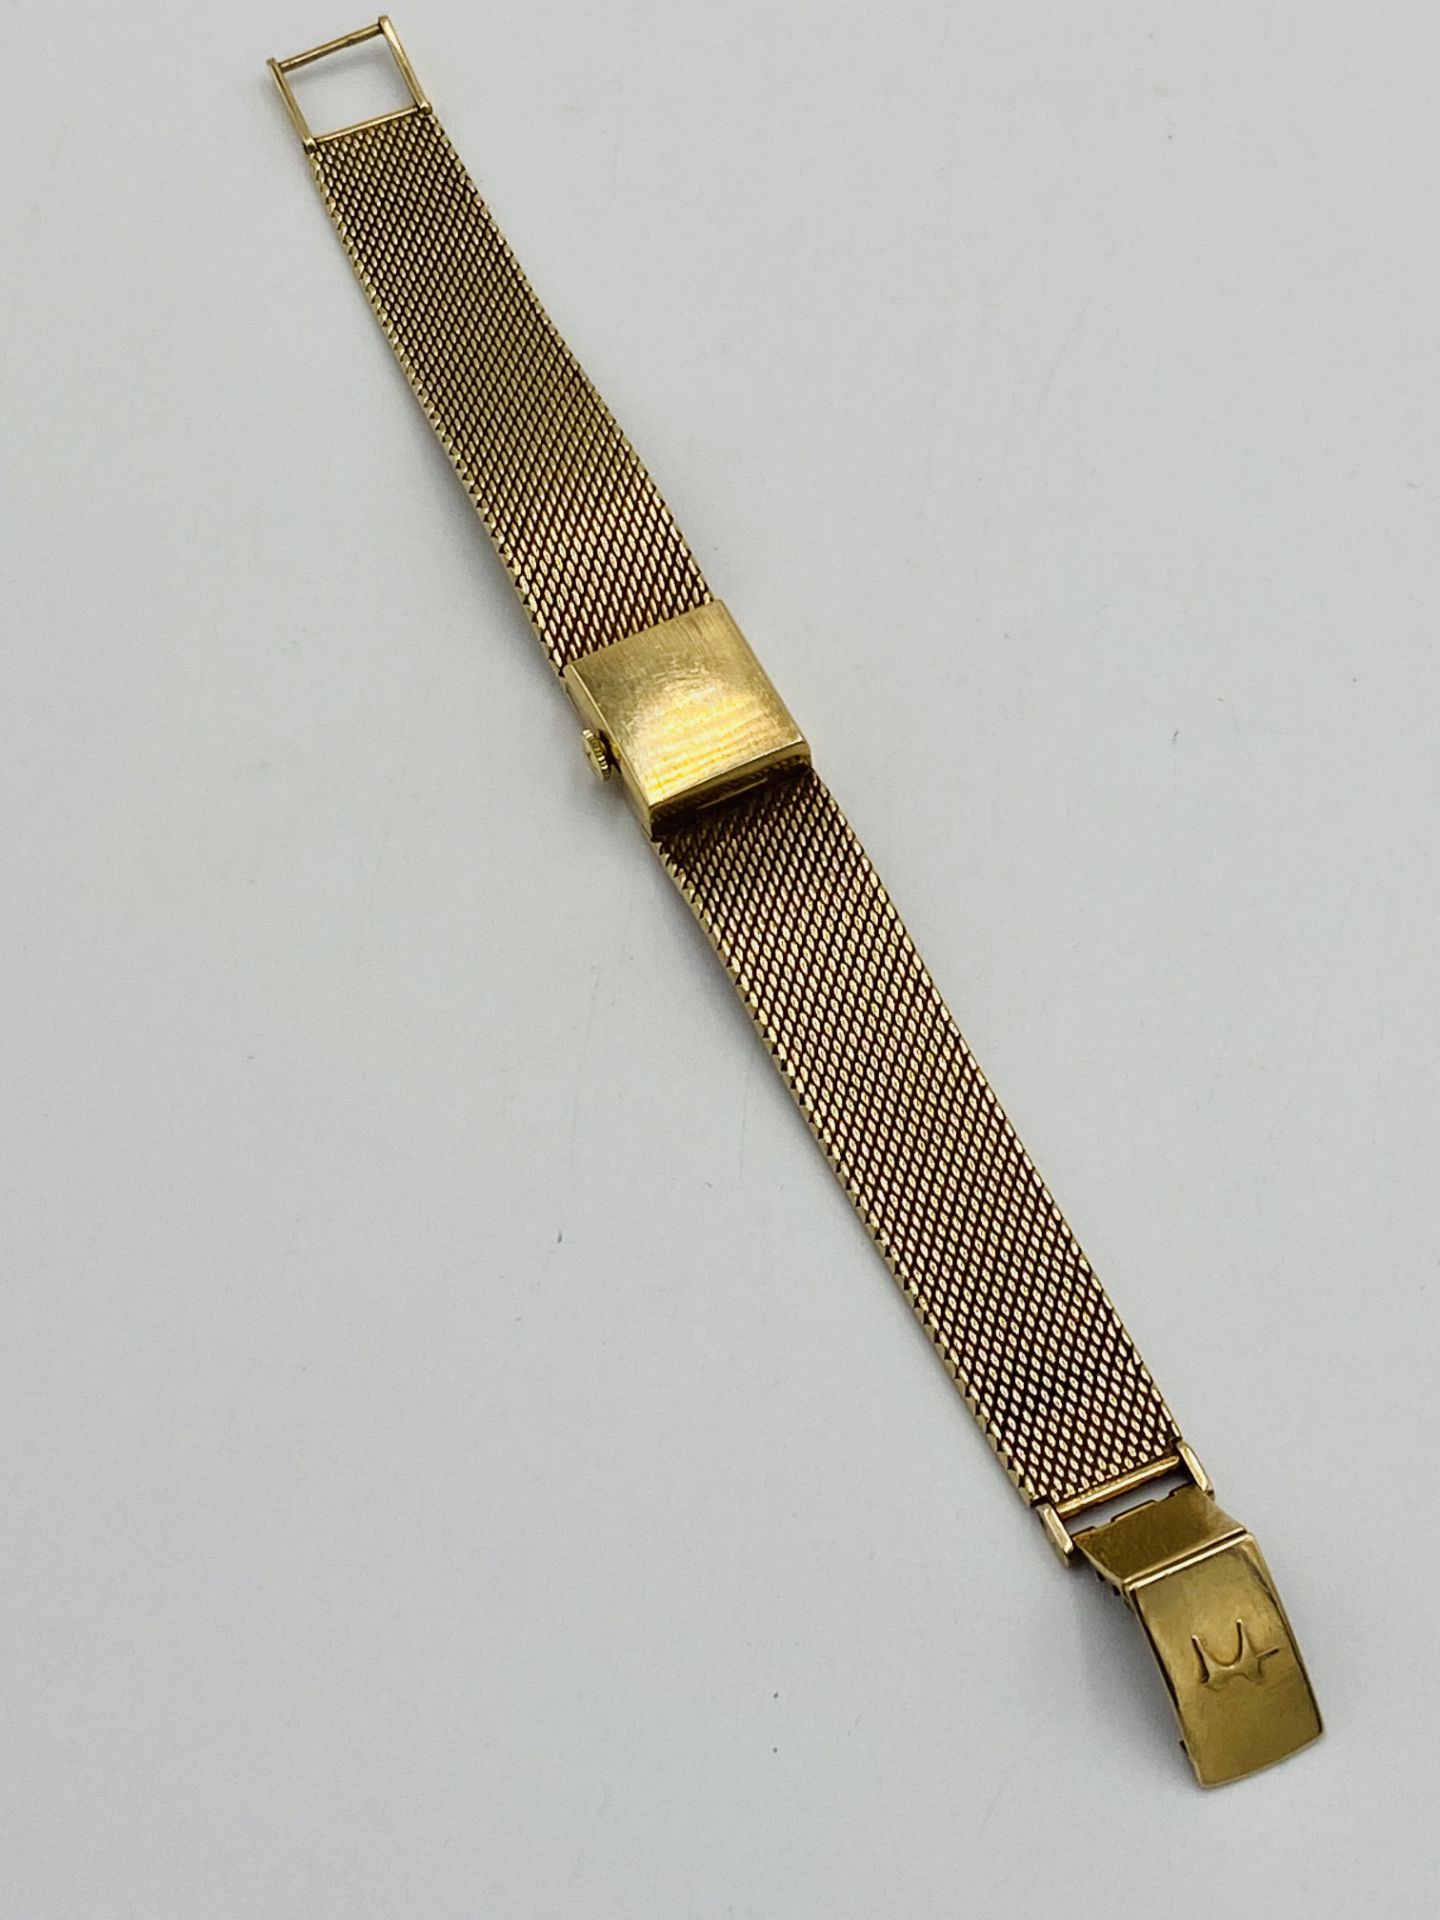 Hamilton wristwatch in 9ct gold case - Image 6 of 6